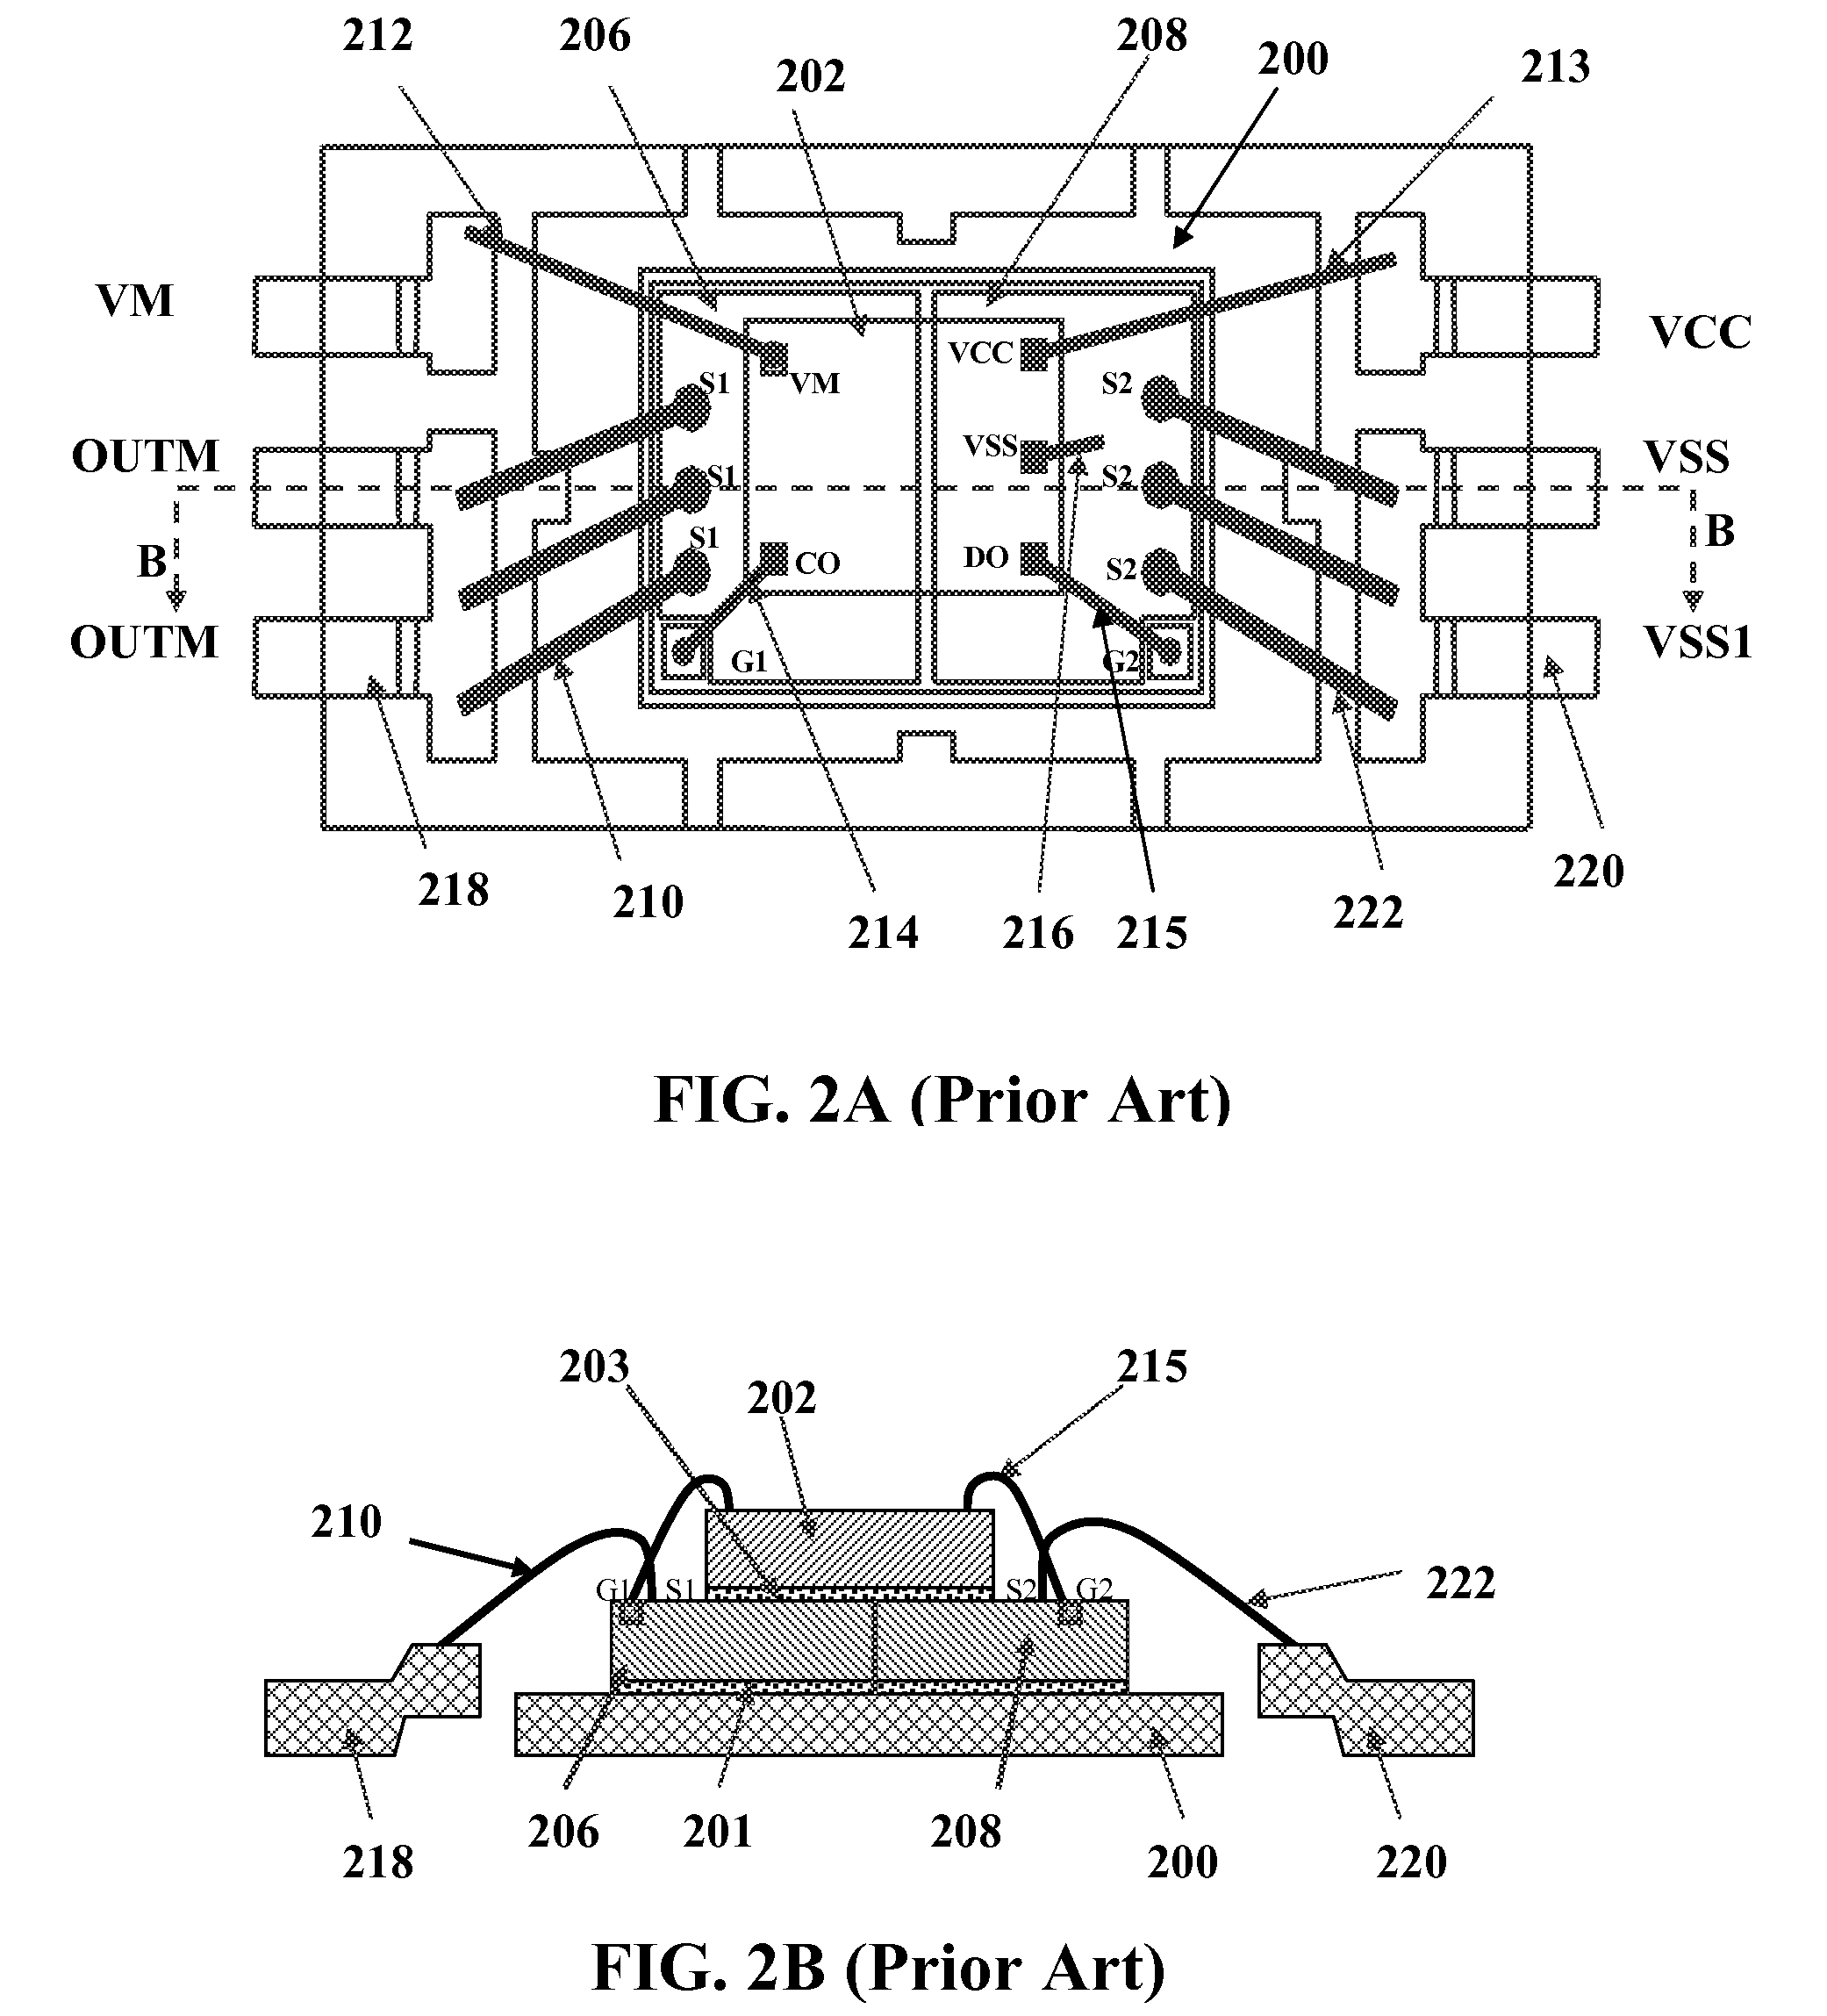 Use of discrete conductive layer in semiconductor device to re-route bonding wires for semiconductor device package